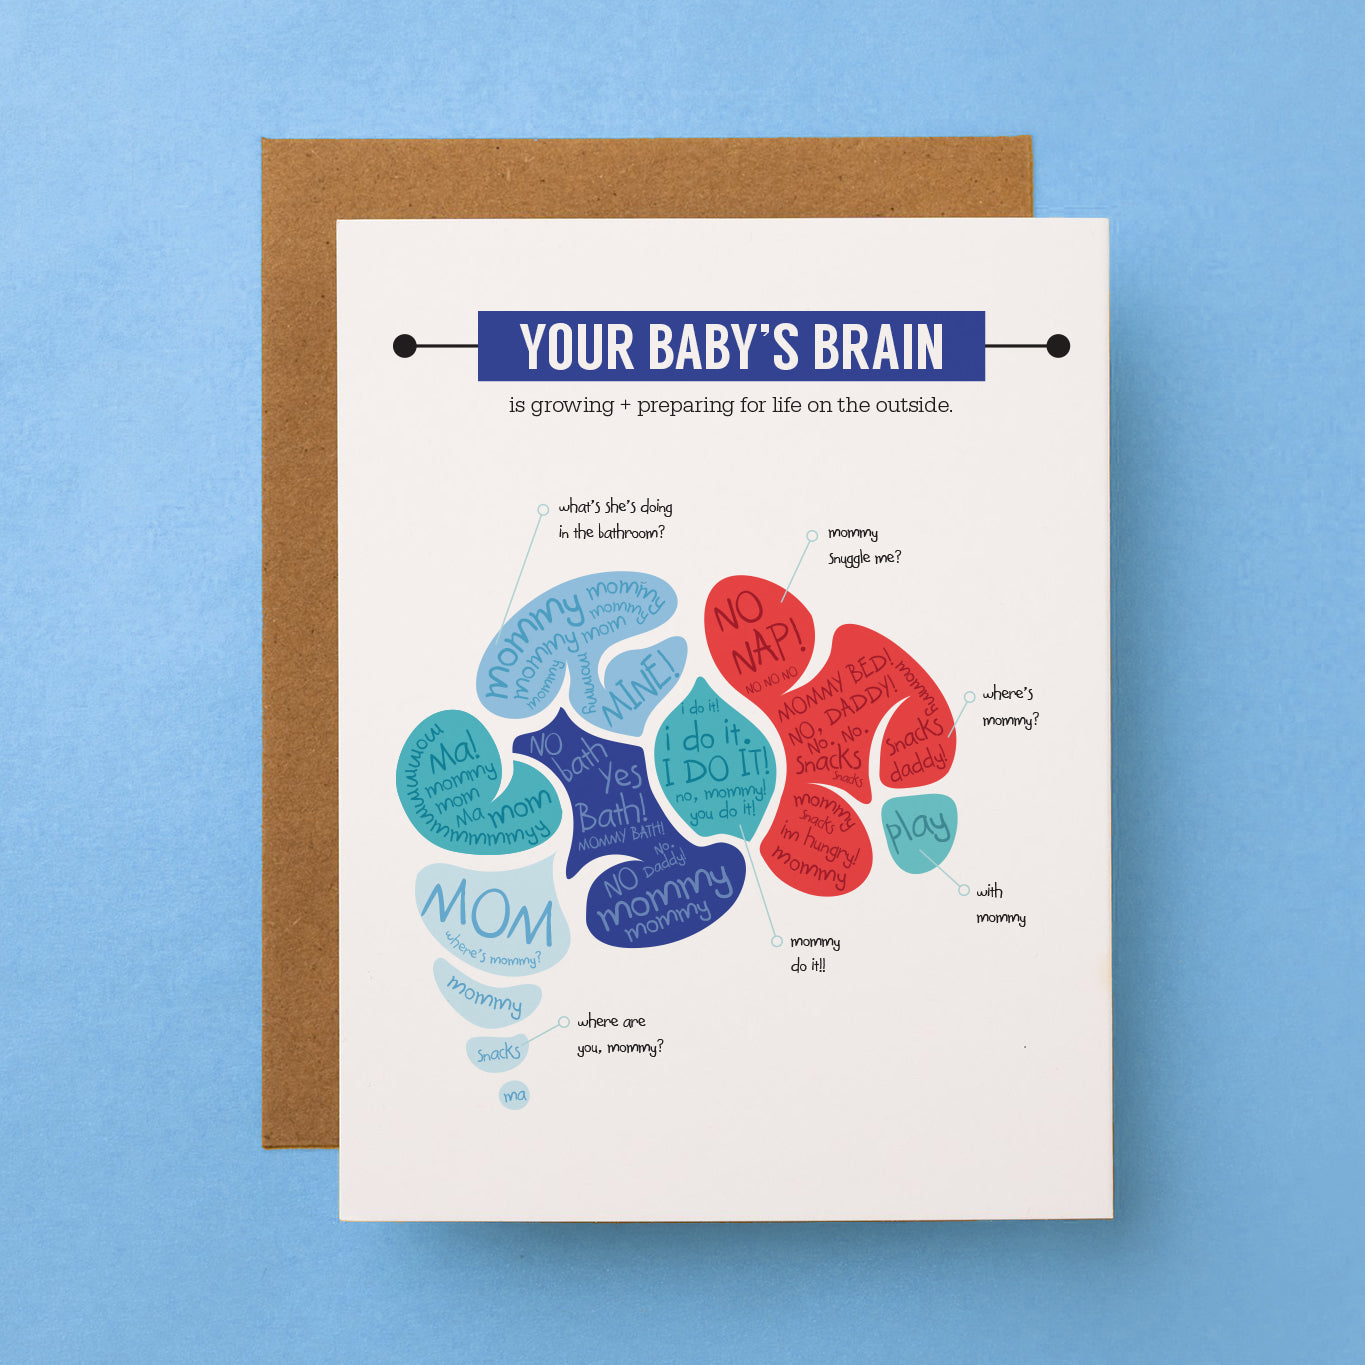 Front of parenthood card that reads "Your Baby's Brain is growing + preparing for life on the outside." a brain is illustrated below filled with comments like "what's she doing in hte bathroom? mommy snuggly me? where's mommy? play with ommy, mommy do it!, where are you mommy? snacks!, ma, mommy, mom, where's mommy, ma! mommy! mom! ma! mommmmmmy! no bath, yes bath! mommy bath! no daddy! mommy! mommy!"